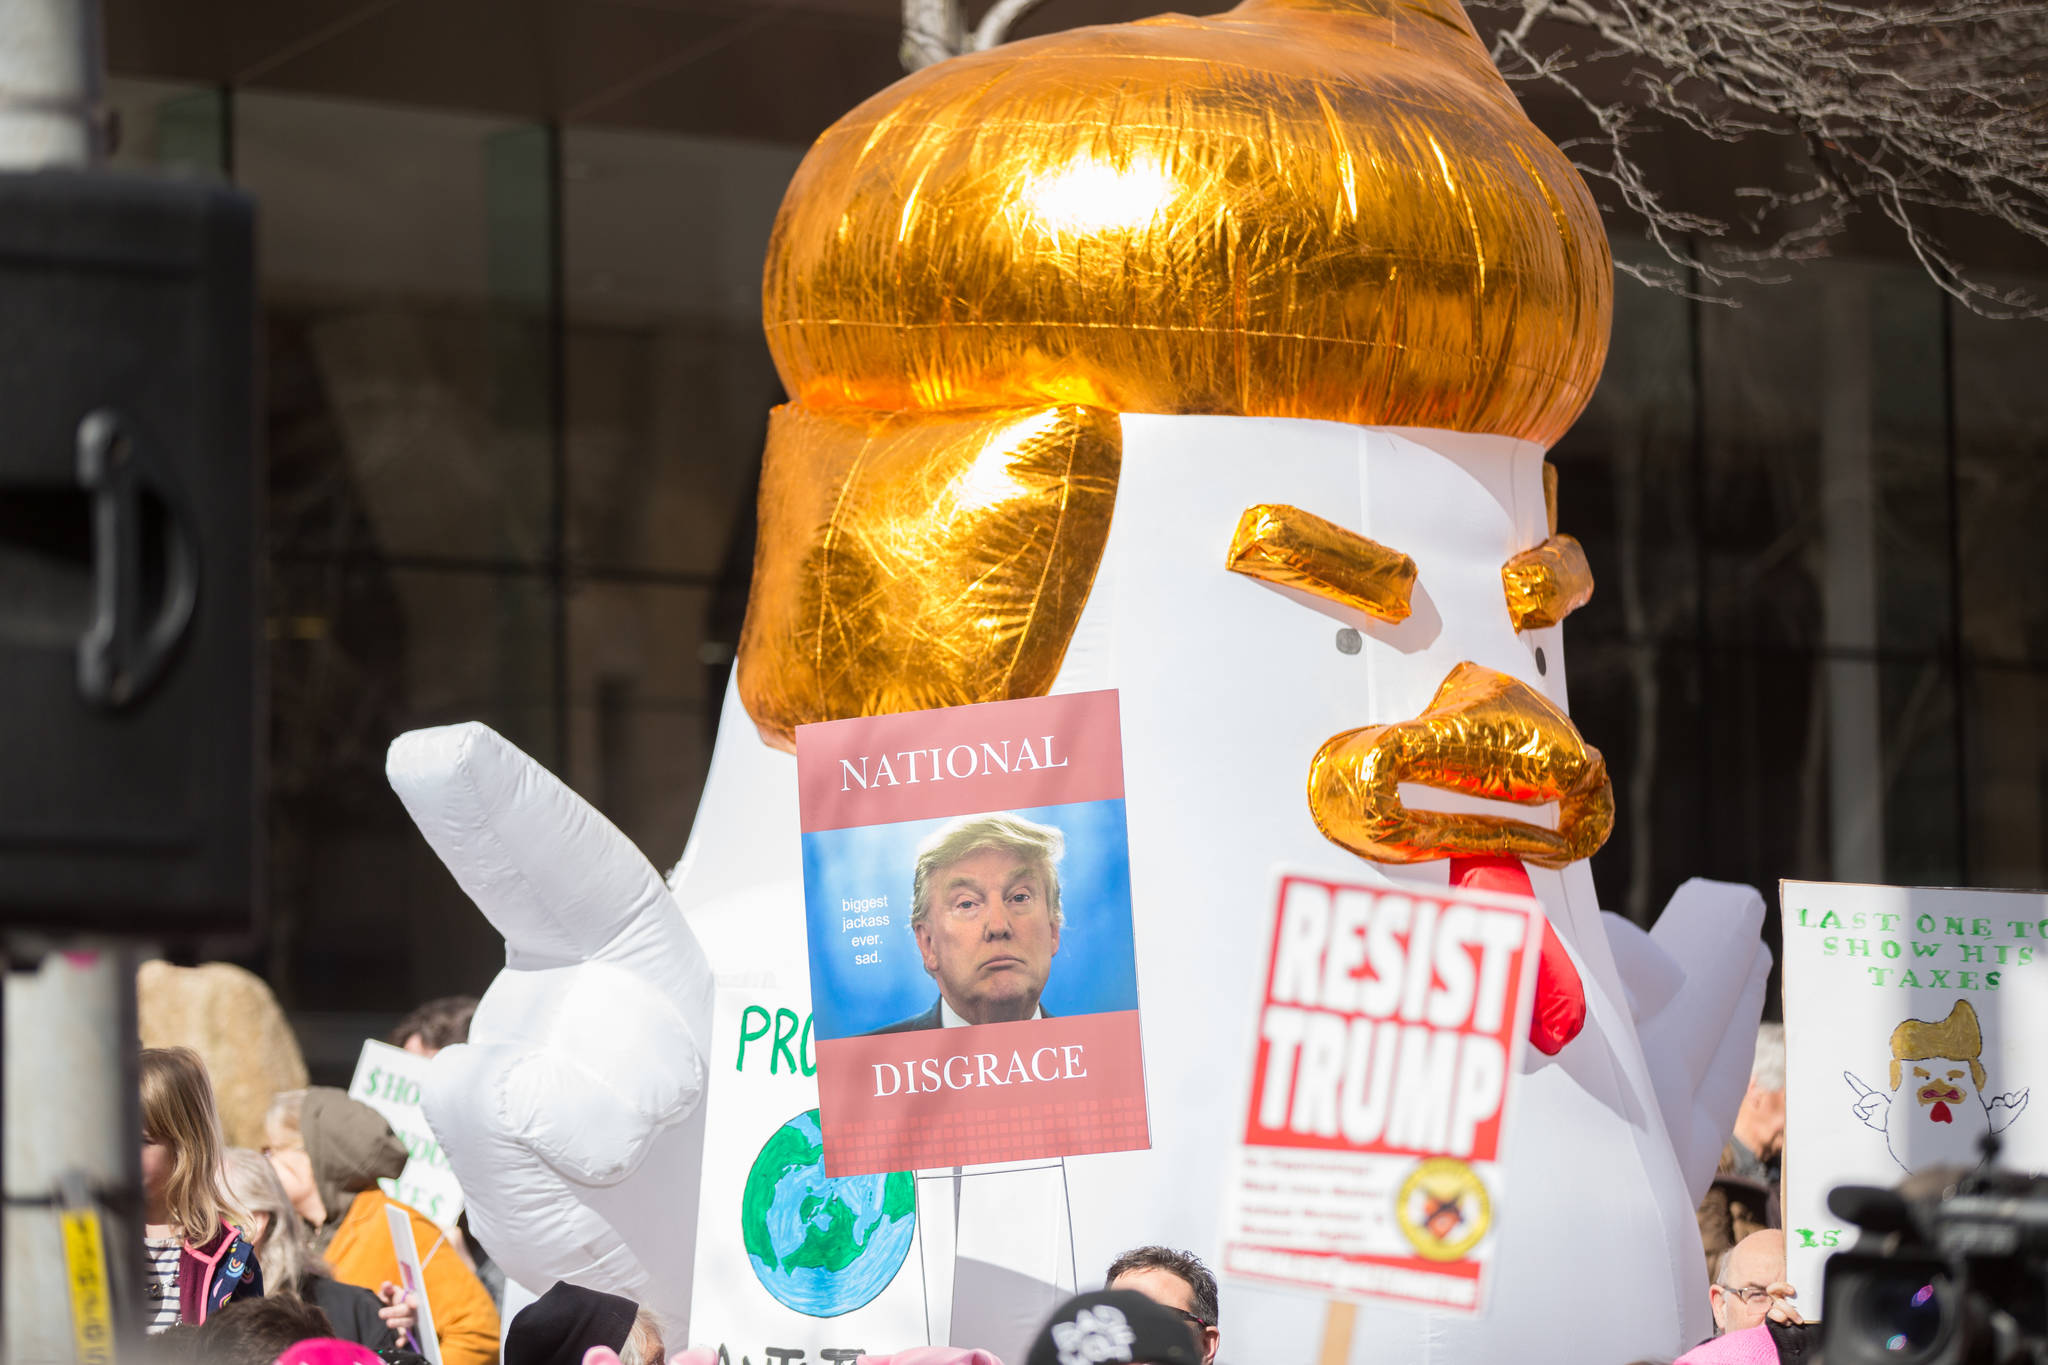 The giant chicken—present at many of the tax marches around the country—looked out over the crowd like a silent sentinel, set to spy on those demanding tax returns from Trump.